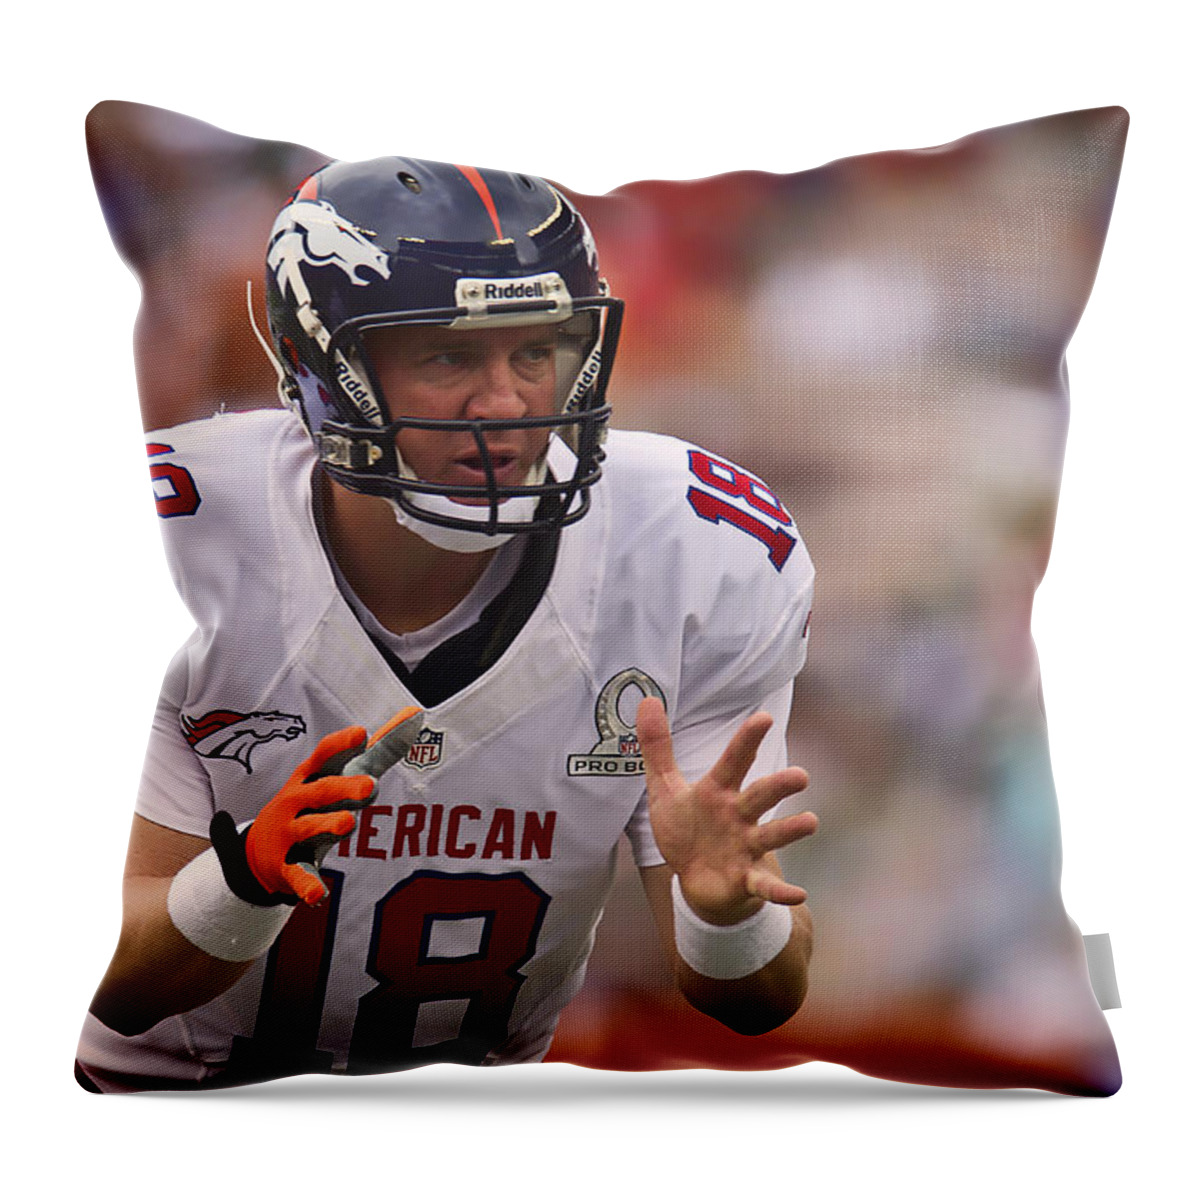 Nfl Throw Pillow featuring the photograph Peyton Manning Calls Out The Play by Mountain Dreams